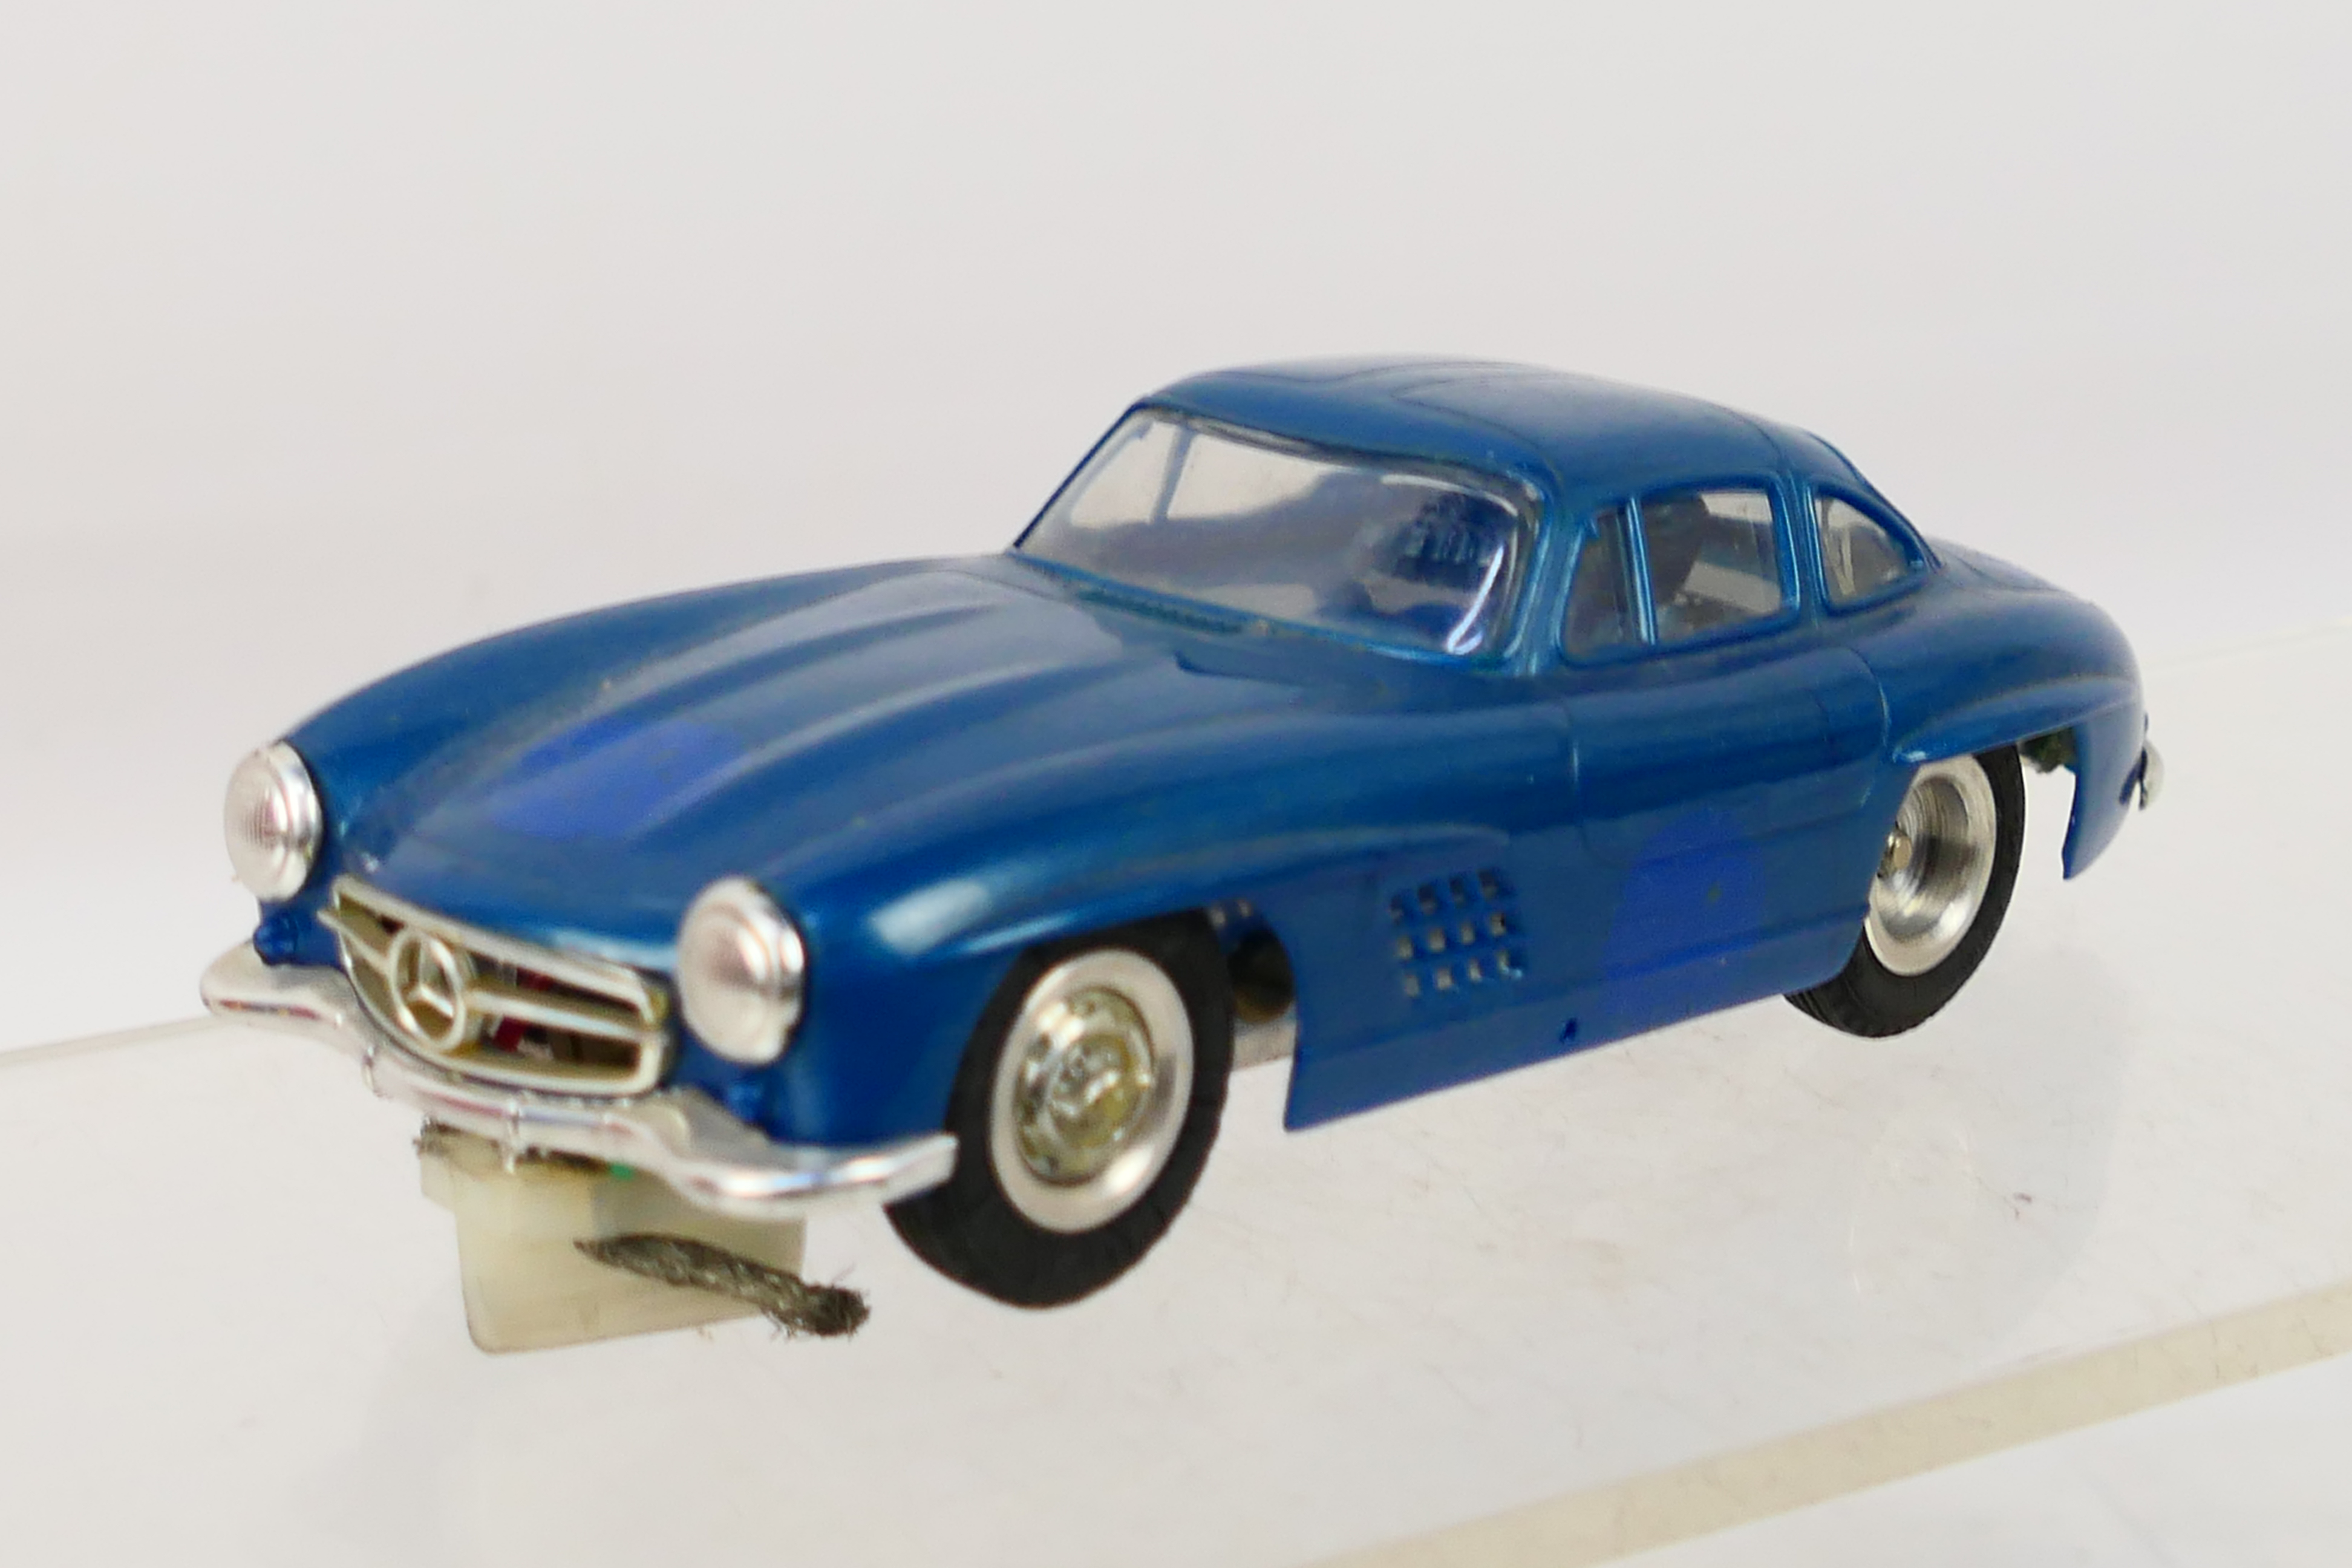 Revell Slot - A vintage Revell Mercedes 300SL Gullwing slot car in 1:32 scale.